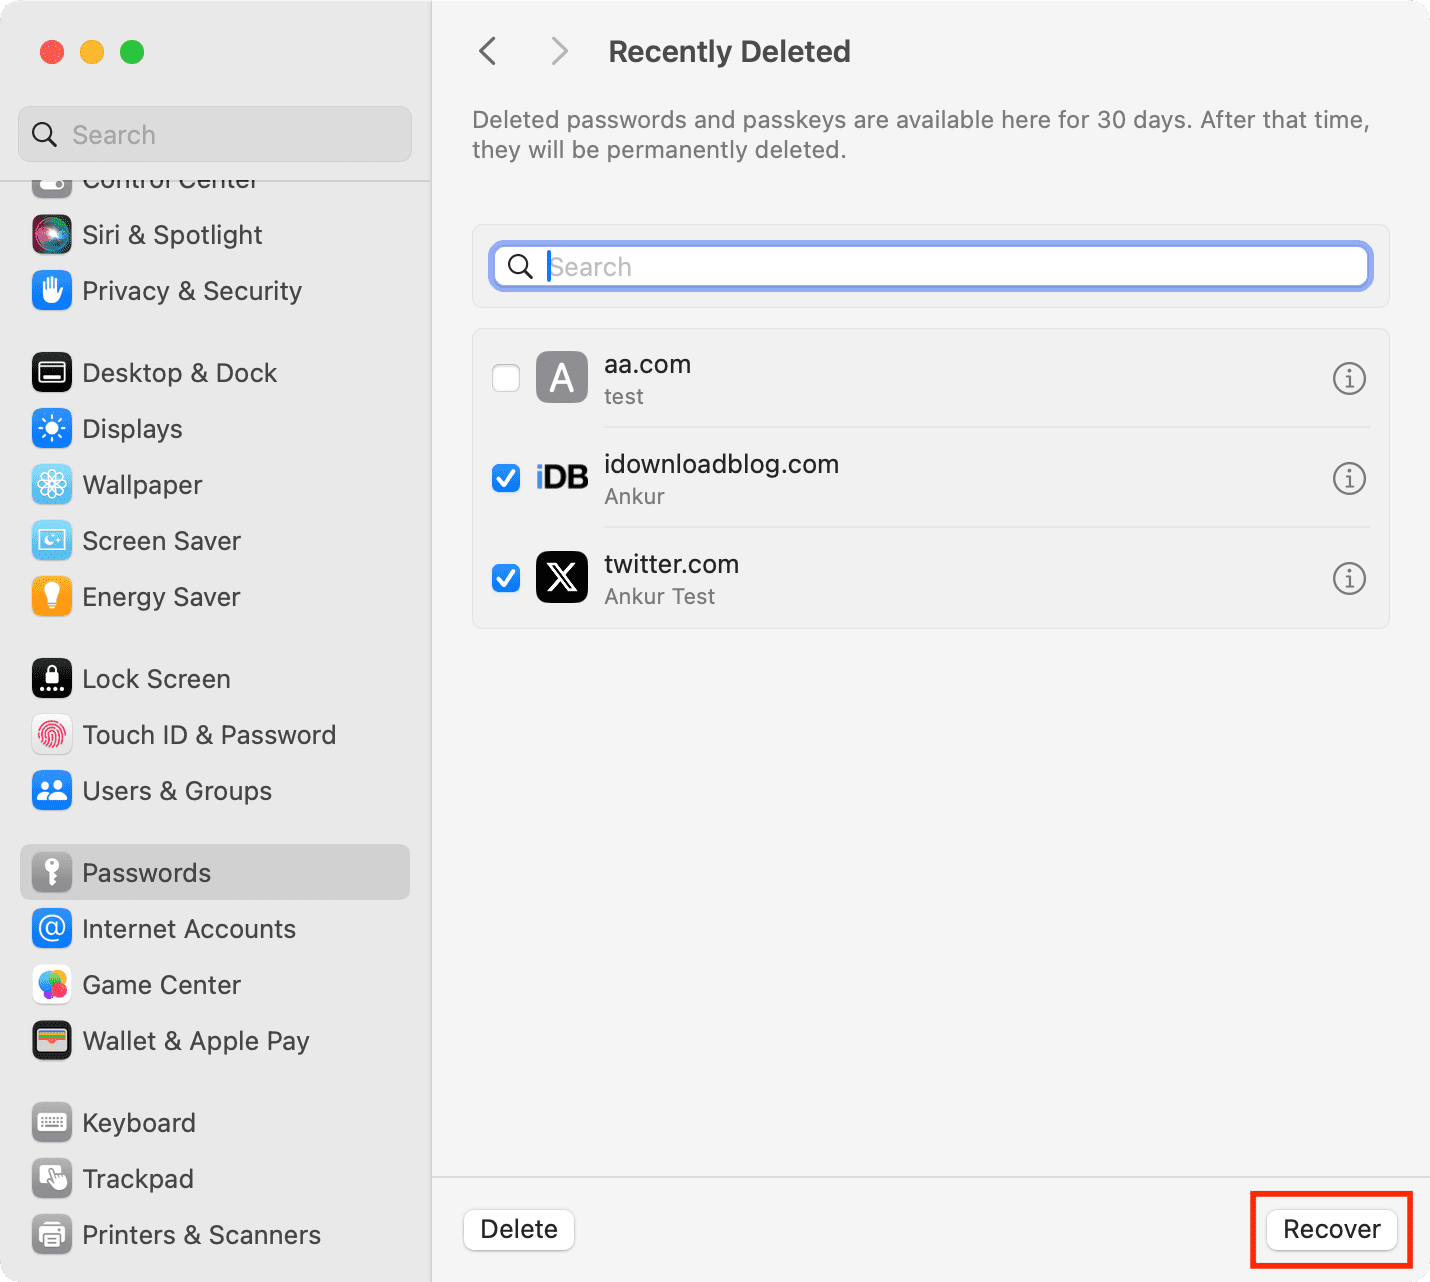 Recovering a deleted password on Mac from System Settings